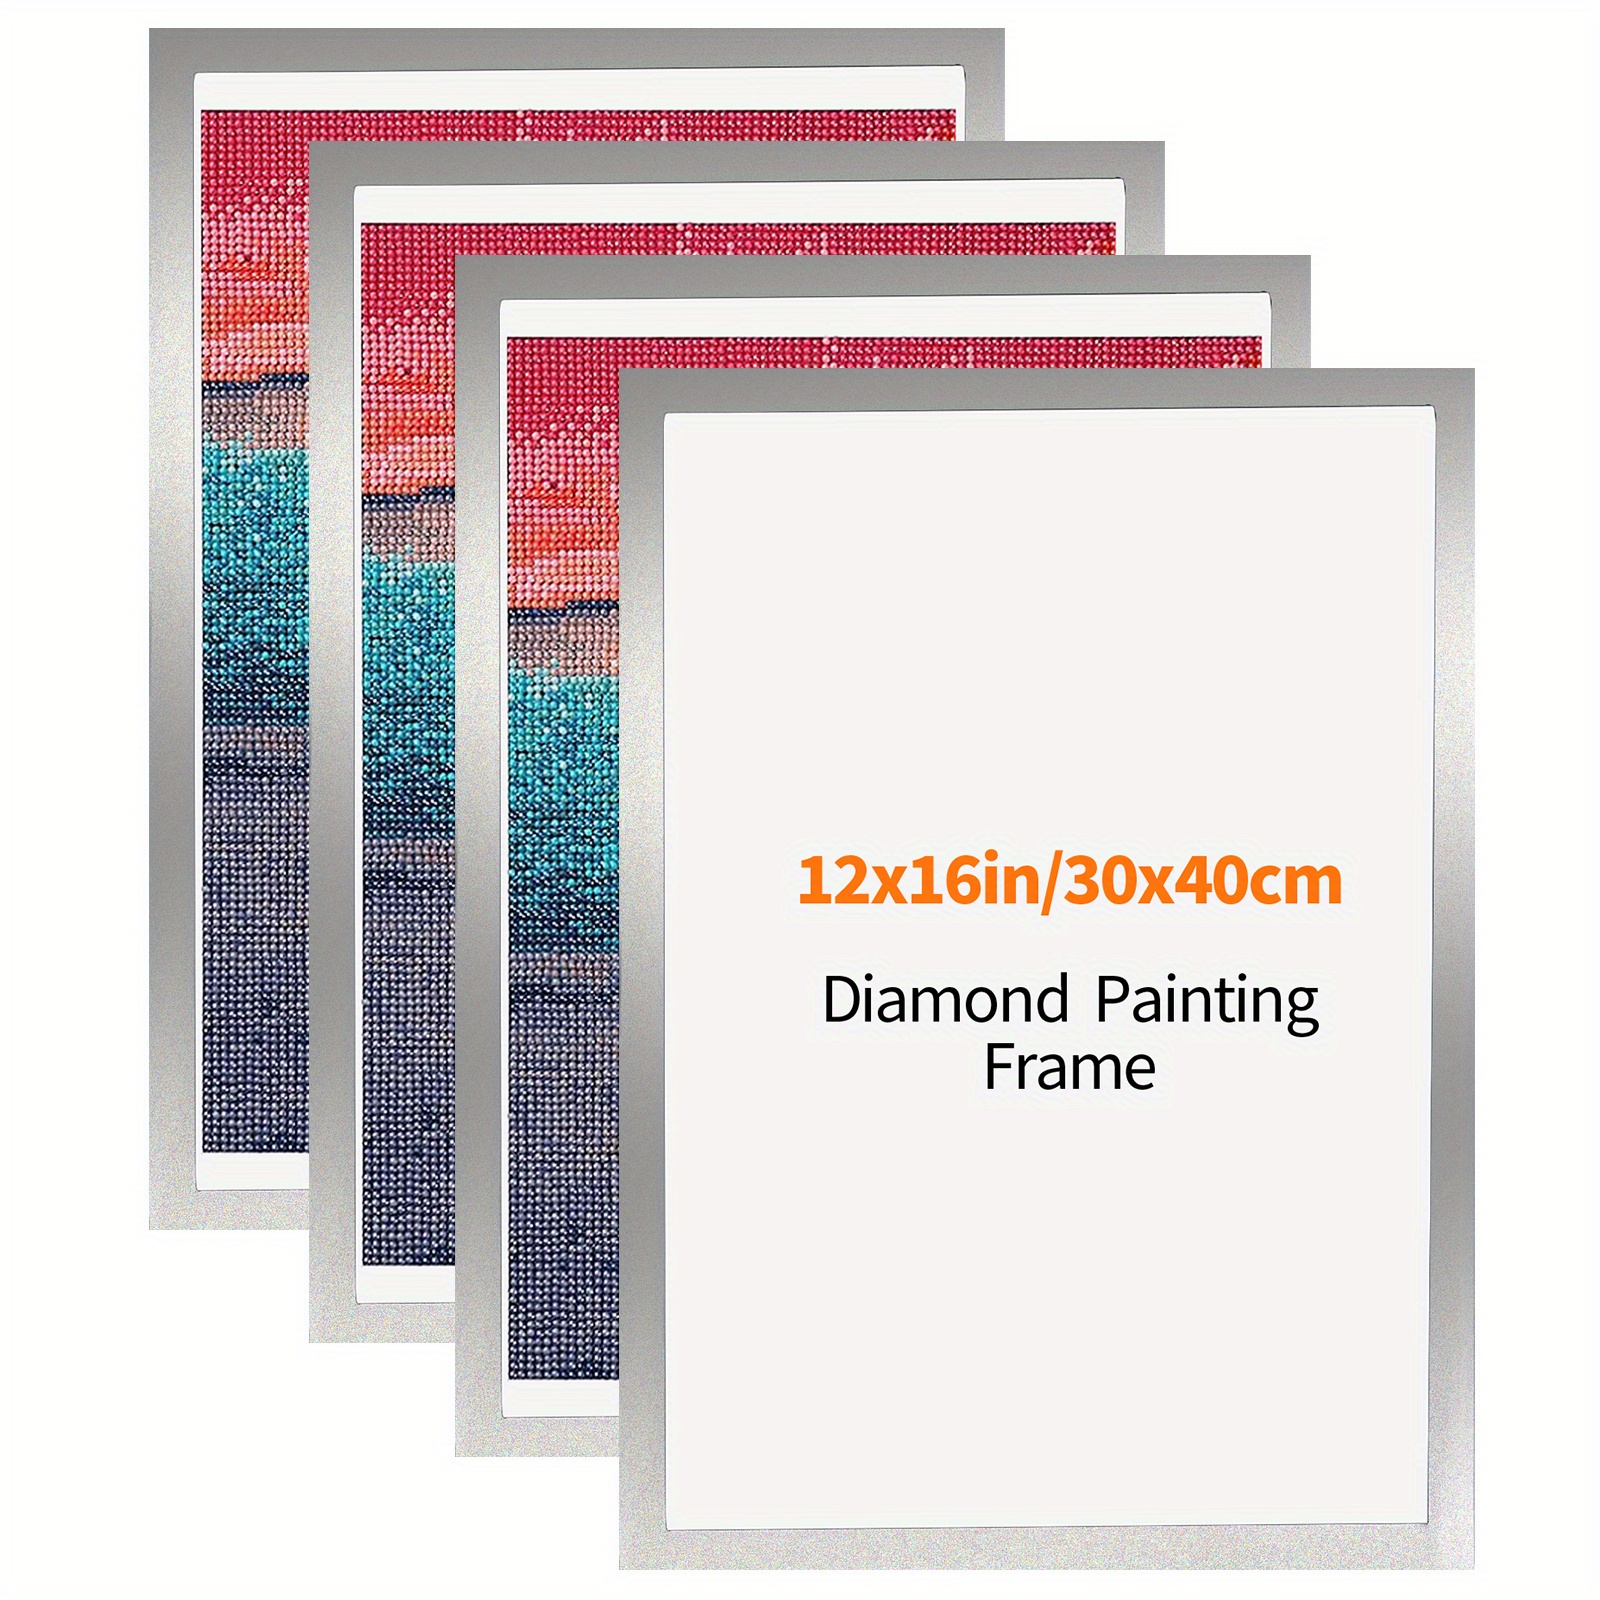 Diamond Painting Frames, Frames For 12x16in/30x40cm Diamond Painting  Canvas, Magnetic Diamond Art Frame Self-adhesive Diamond Art Accessories,  Frames